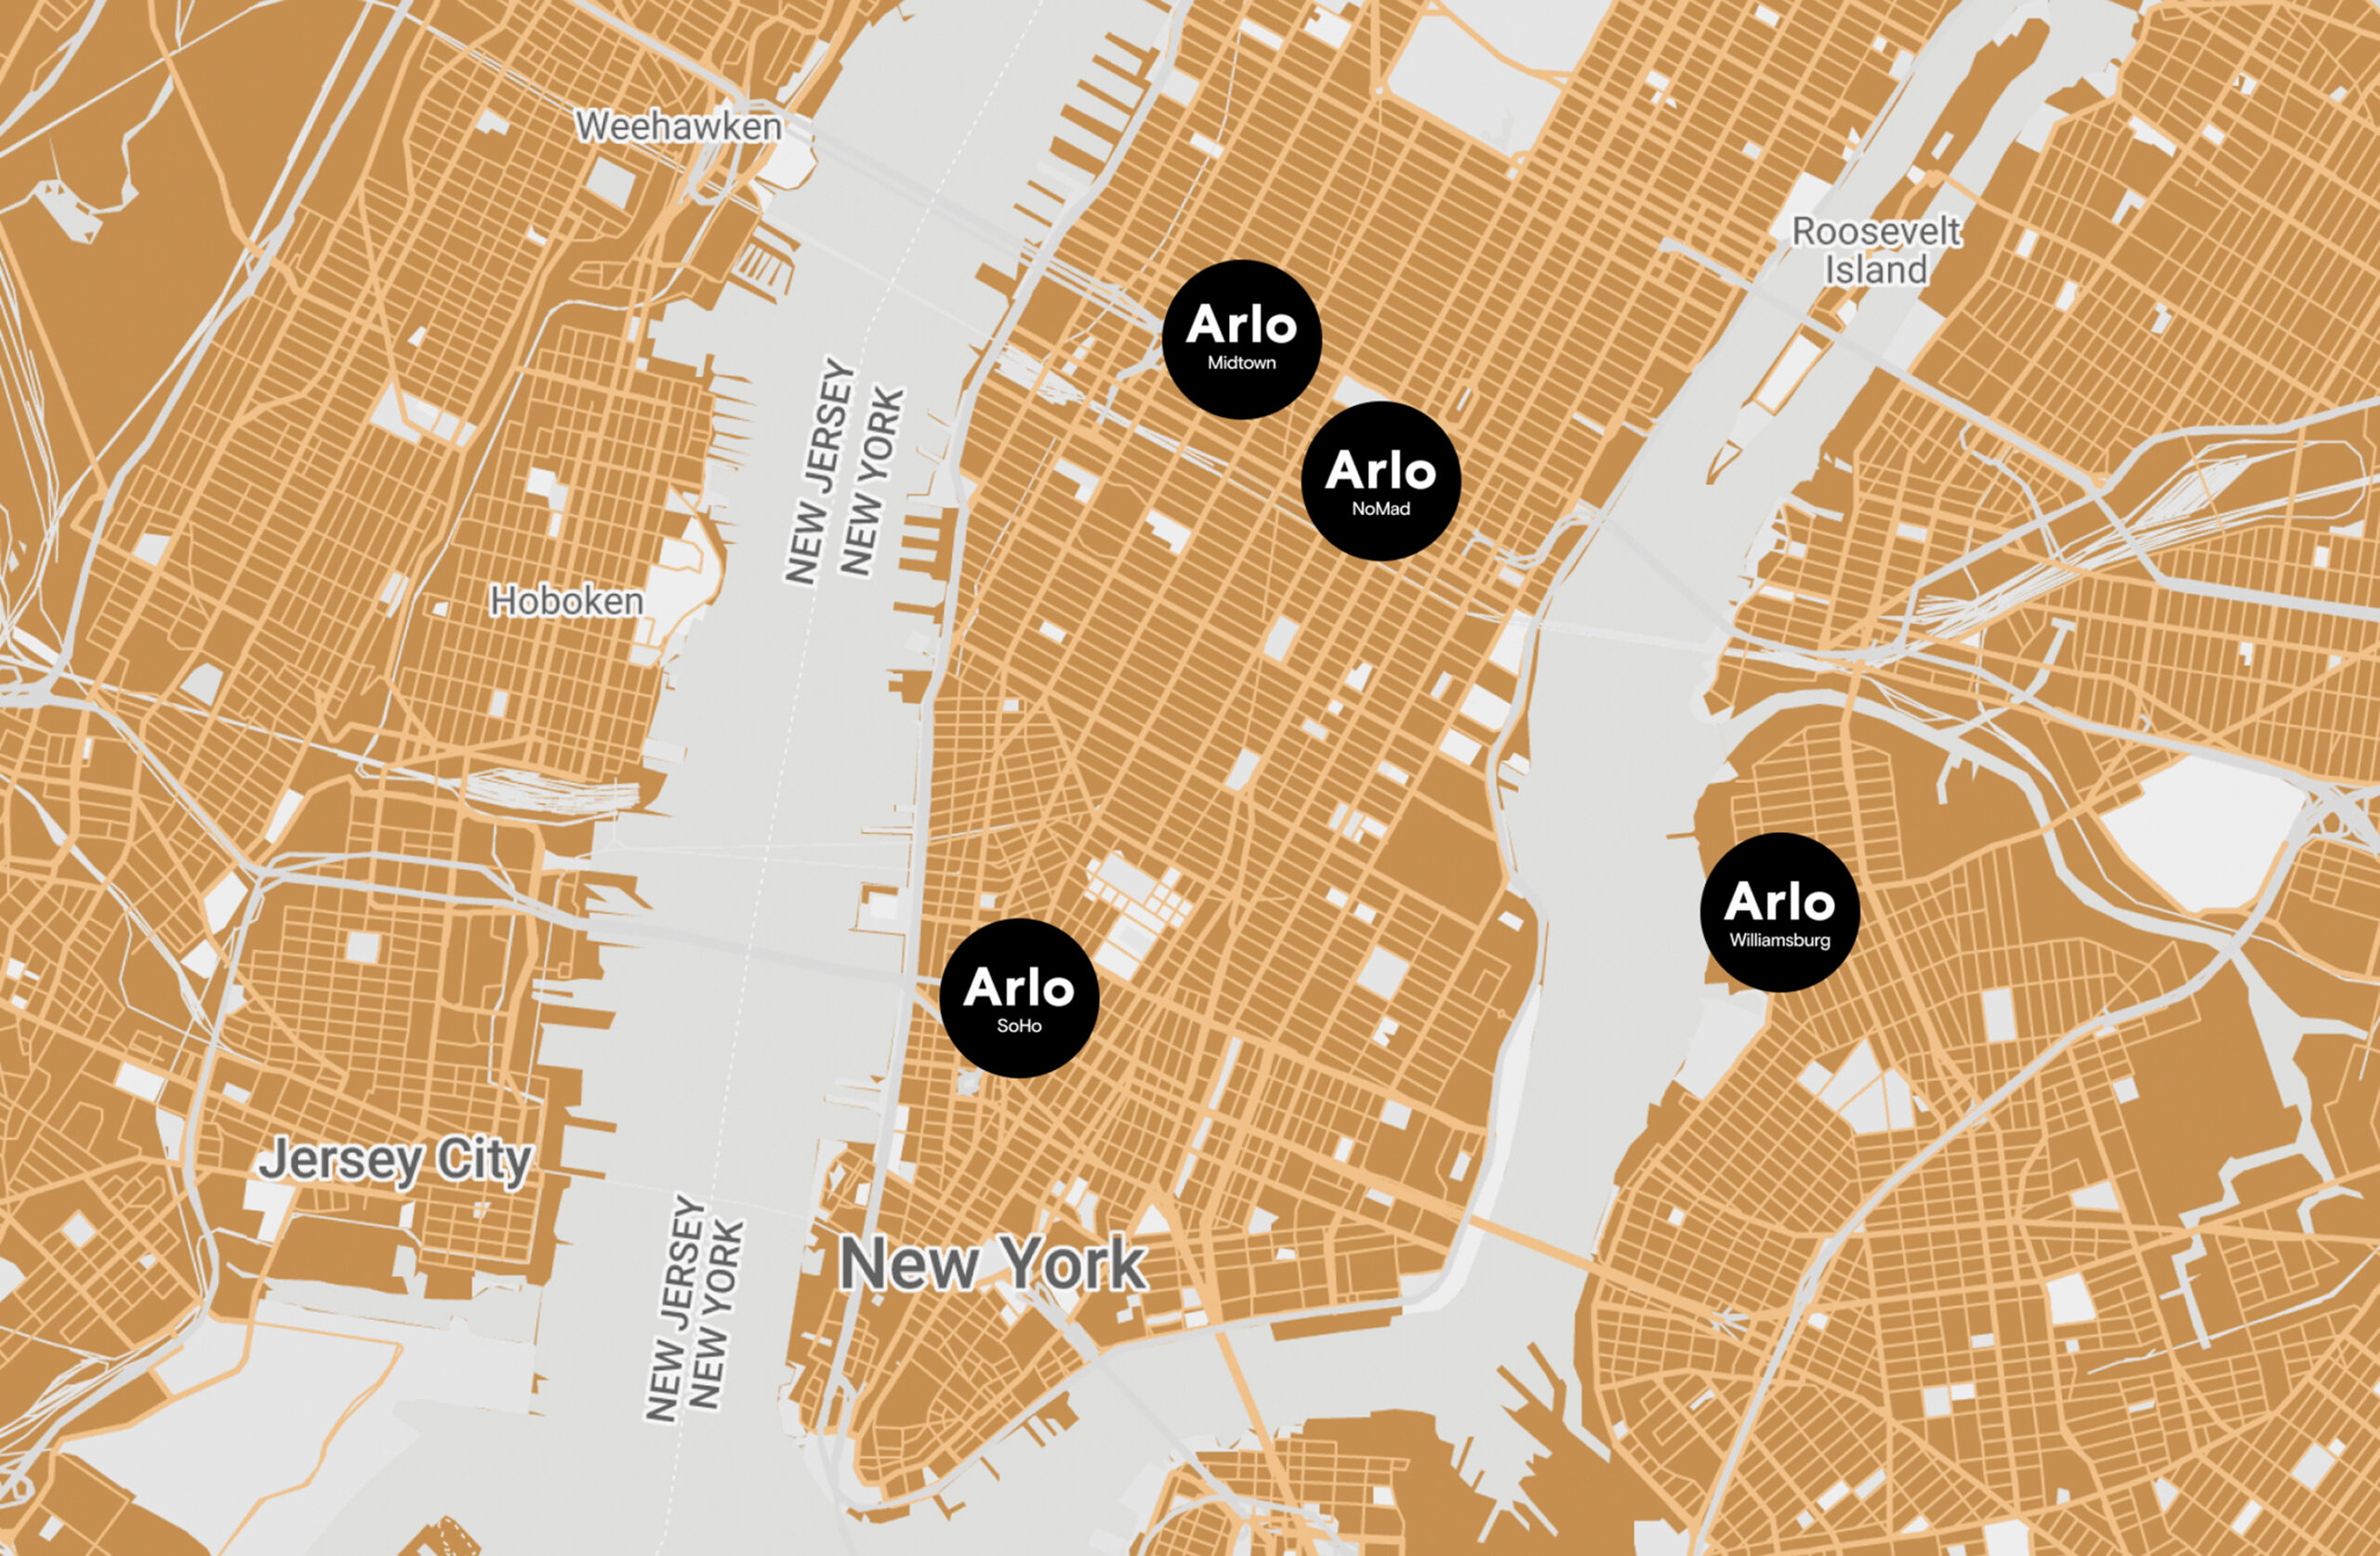 Map view of New York City, New York with locations of Arlo Midtown at 351 West 38th Street, New York, NY 10018; Arlo NoMad at 11 East 31st Street, New York, NY 10016; Arlo Williamsburg at 96 Wythe Ave, Brooklyn, NY 11249; and Arlo SoHo at 231 Hudson Street, New York, NY 10013